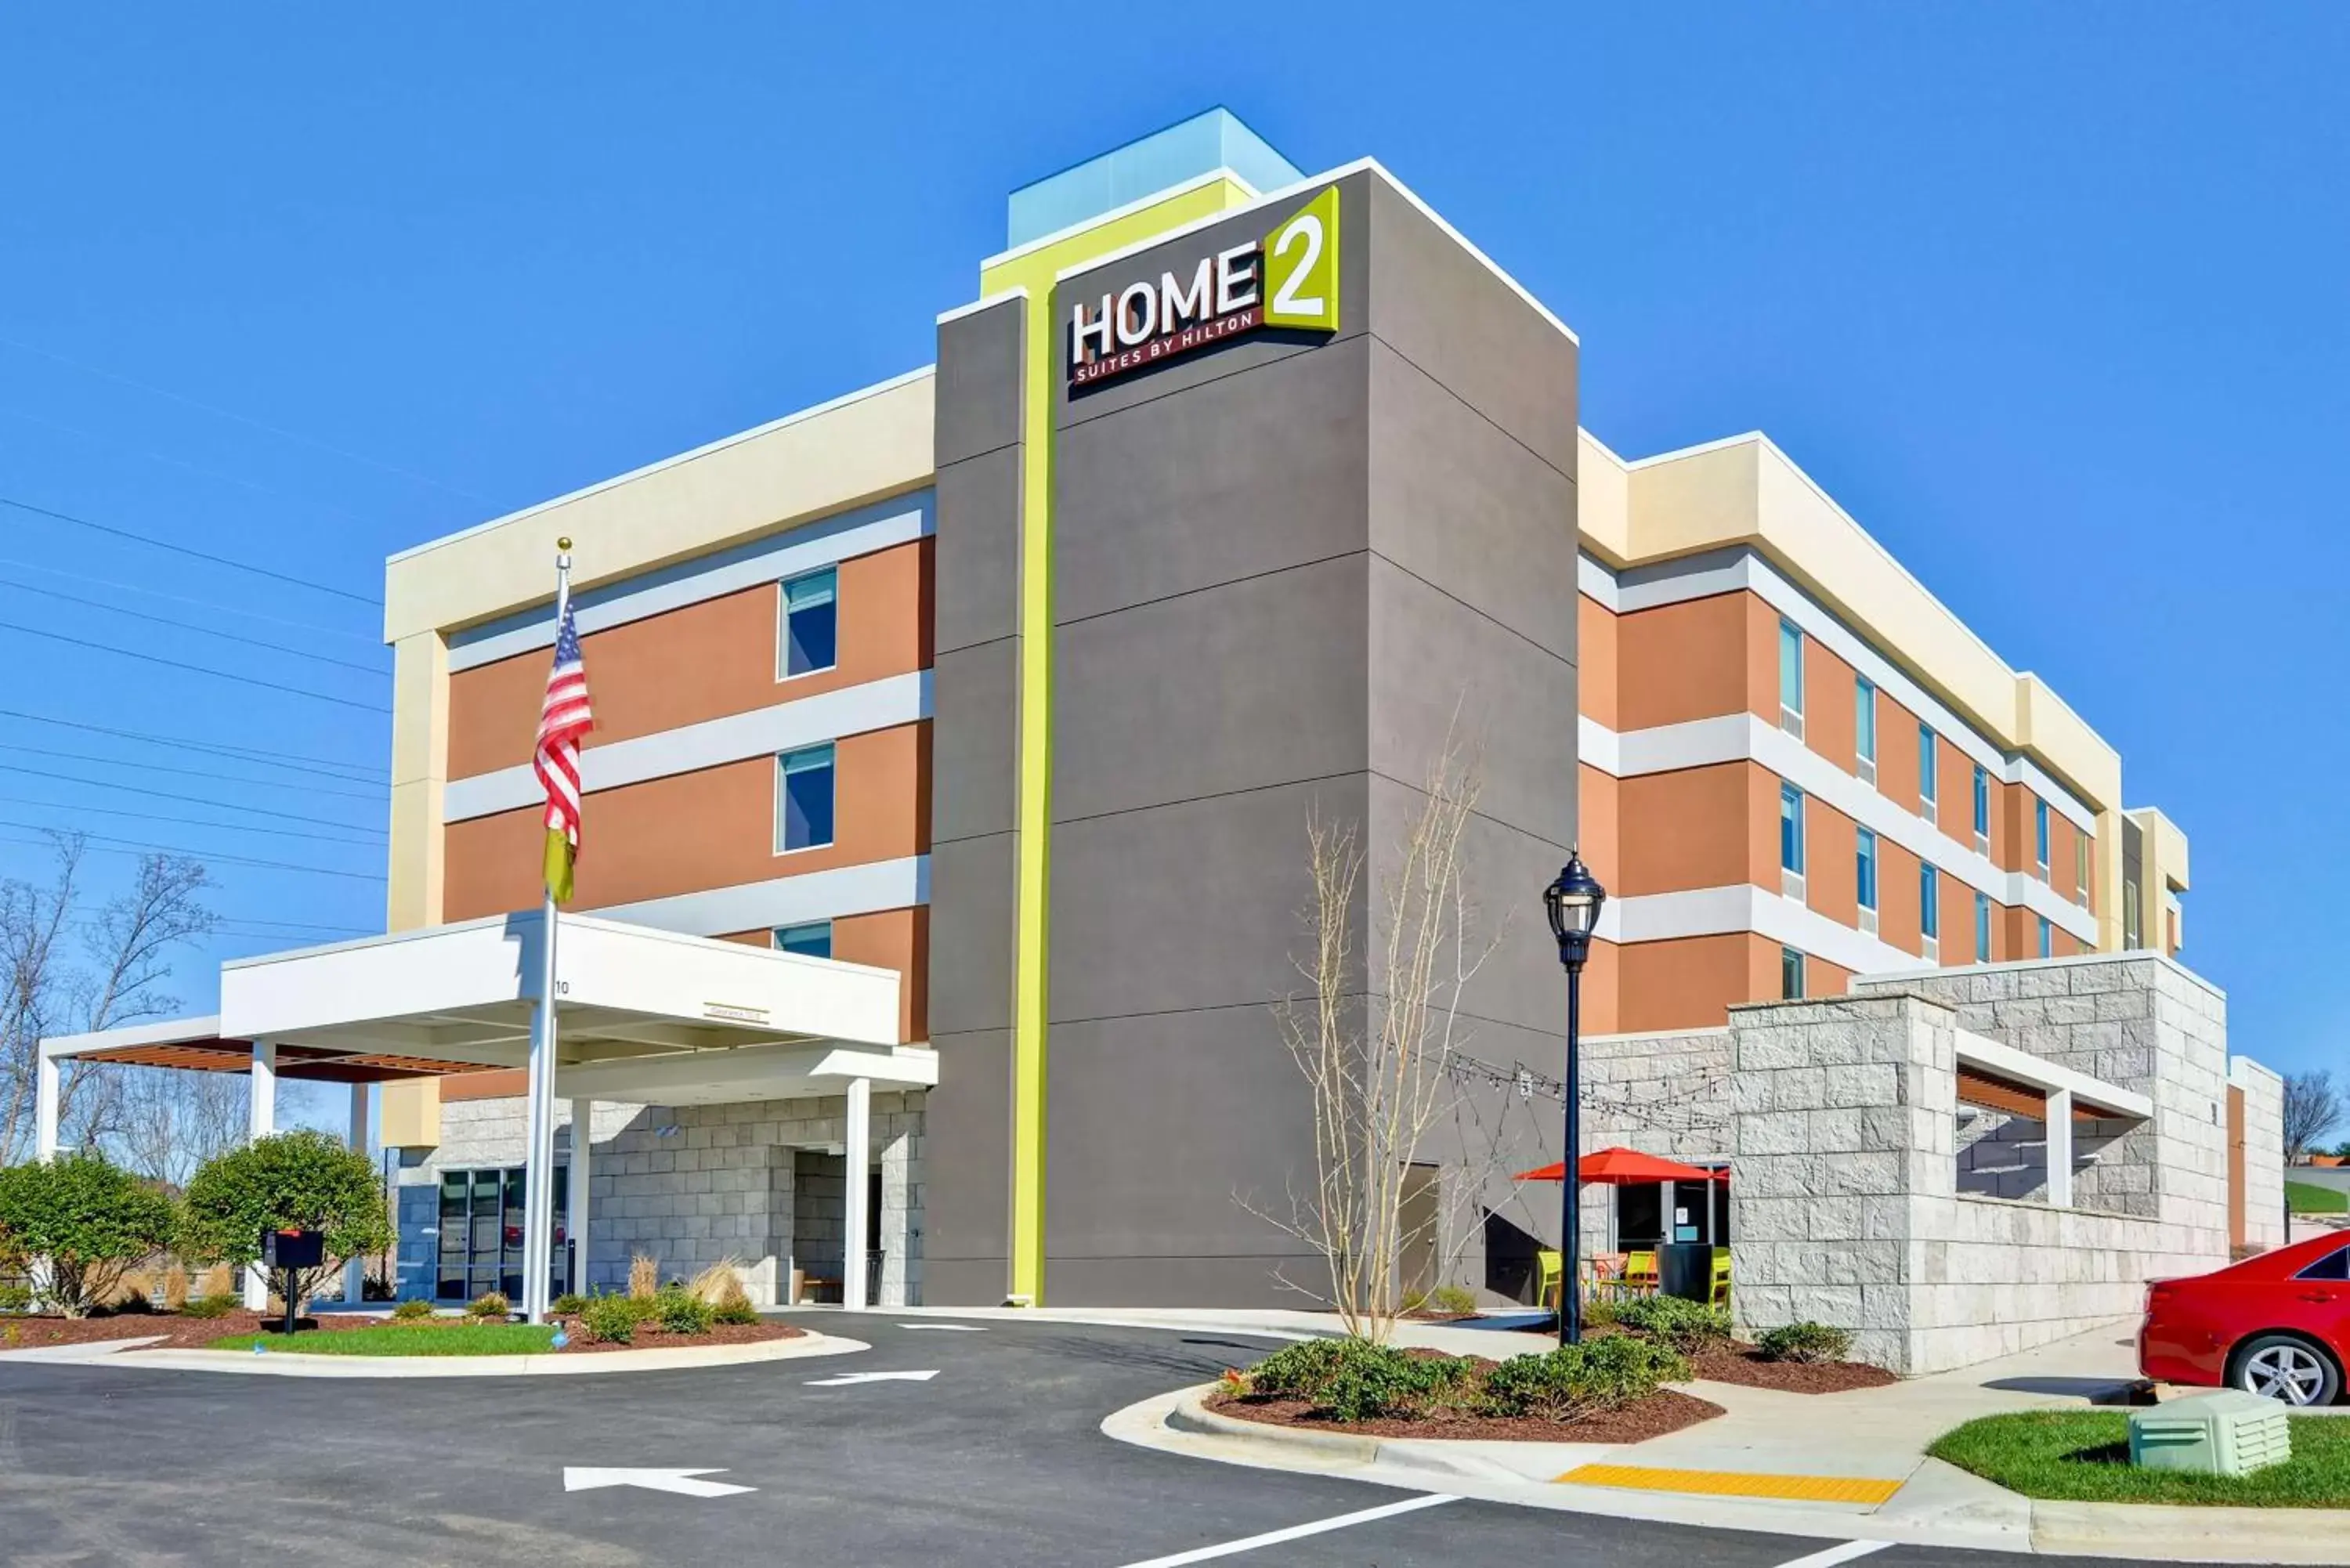 Property Building in Home2 Suites By Hilton Winston-Salem Hanes Mall